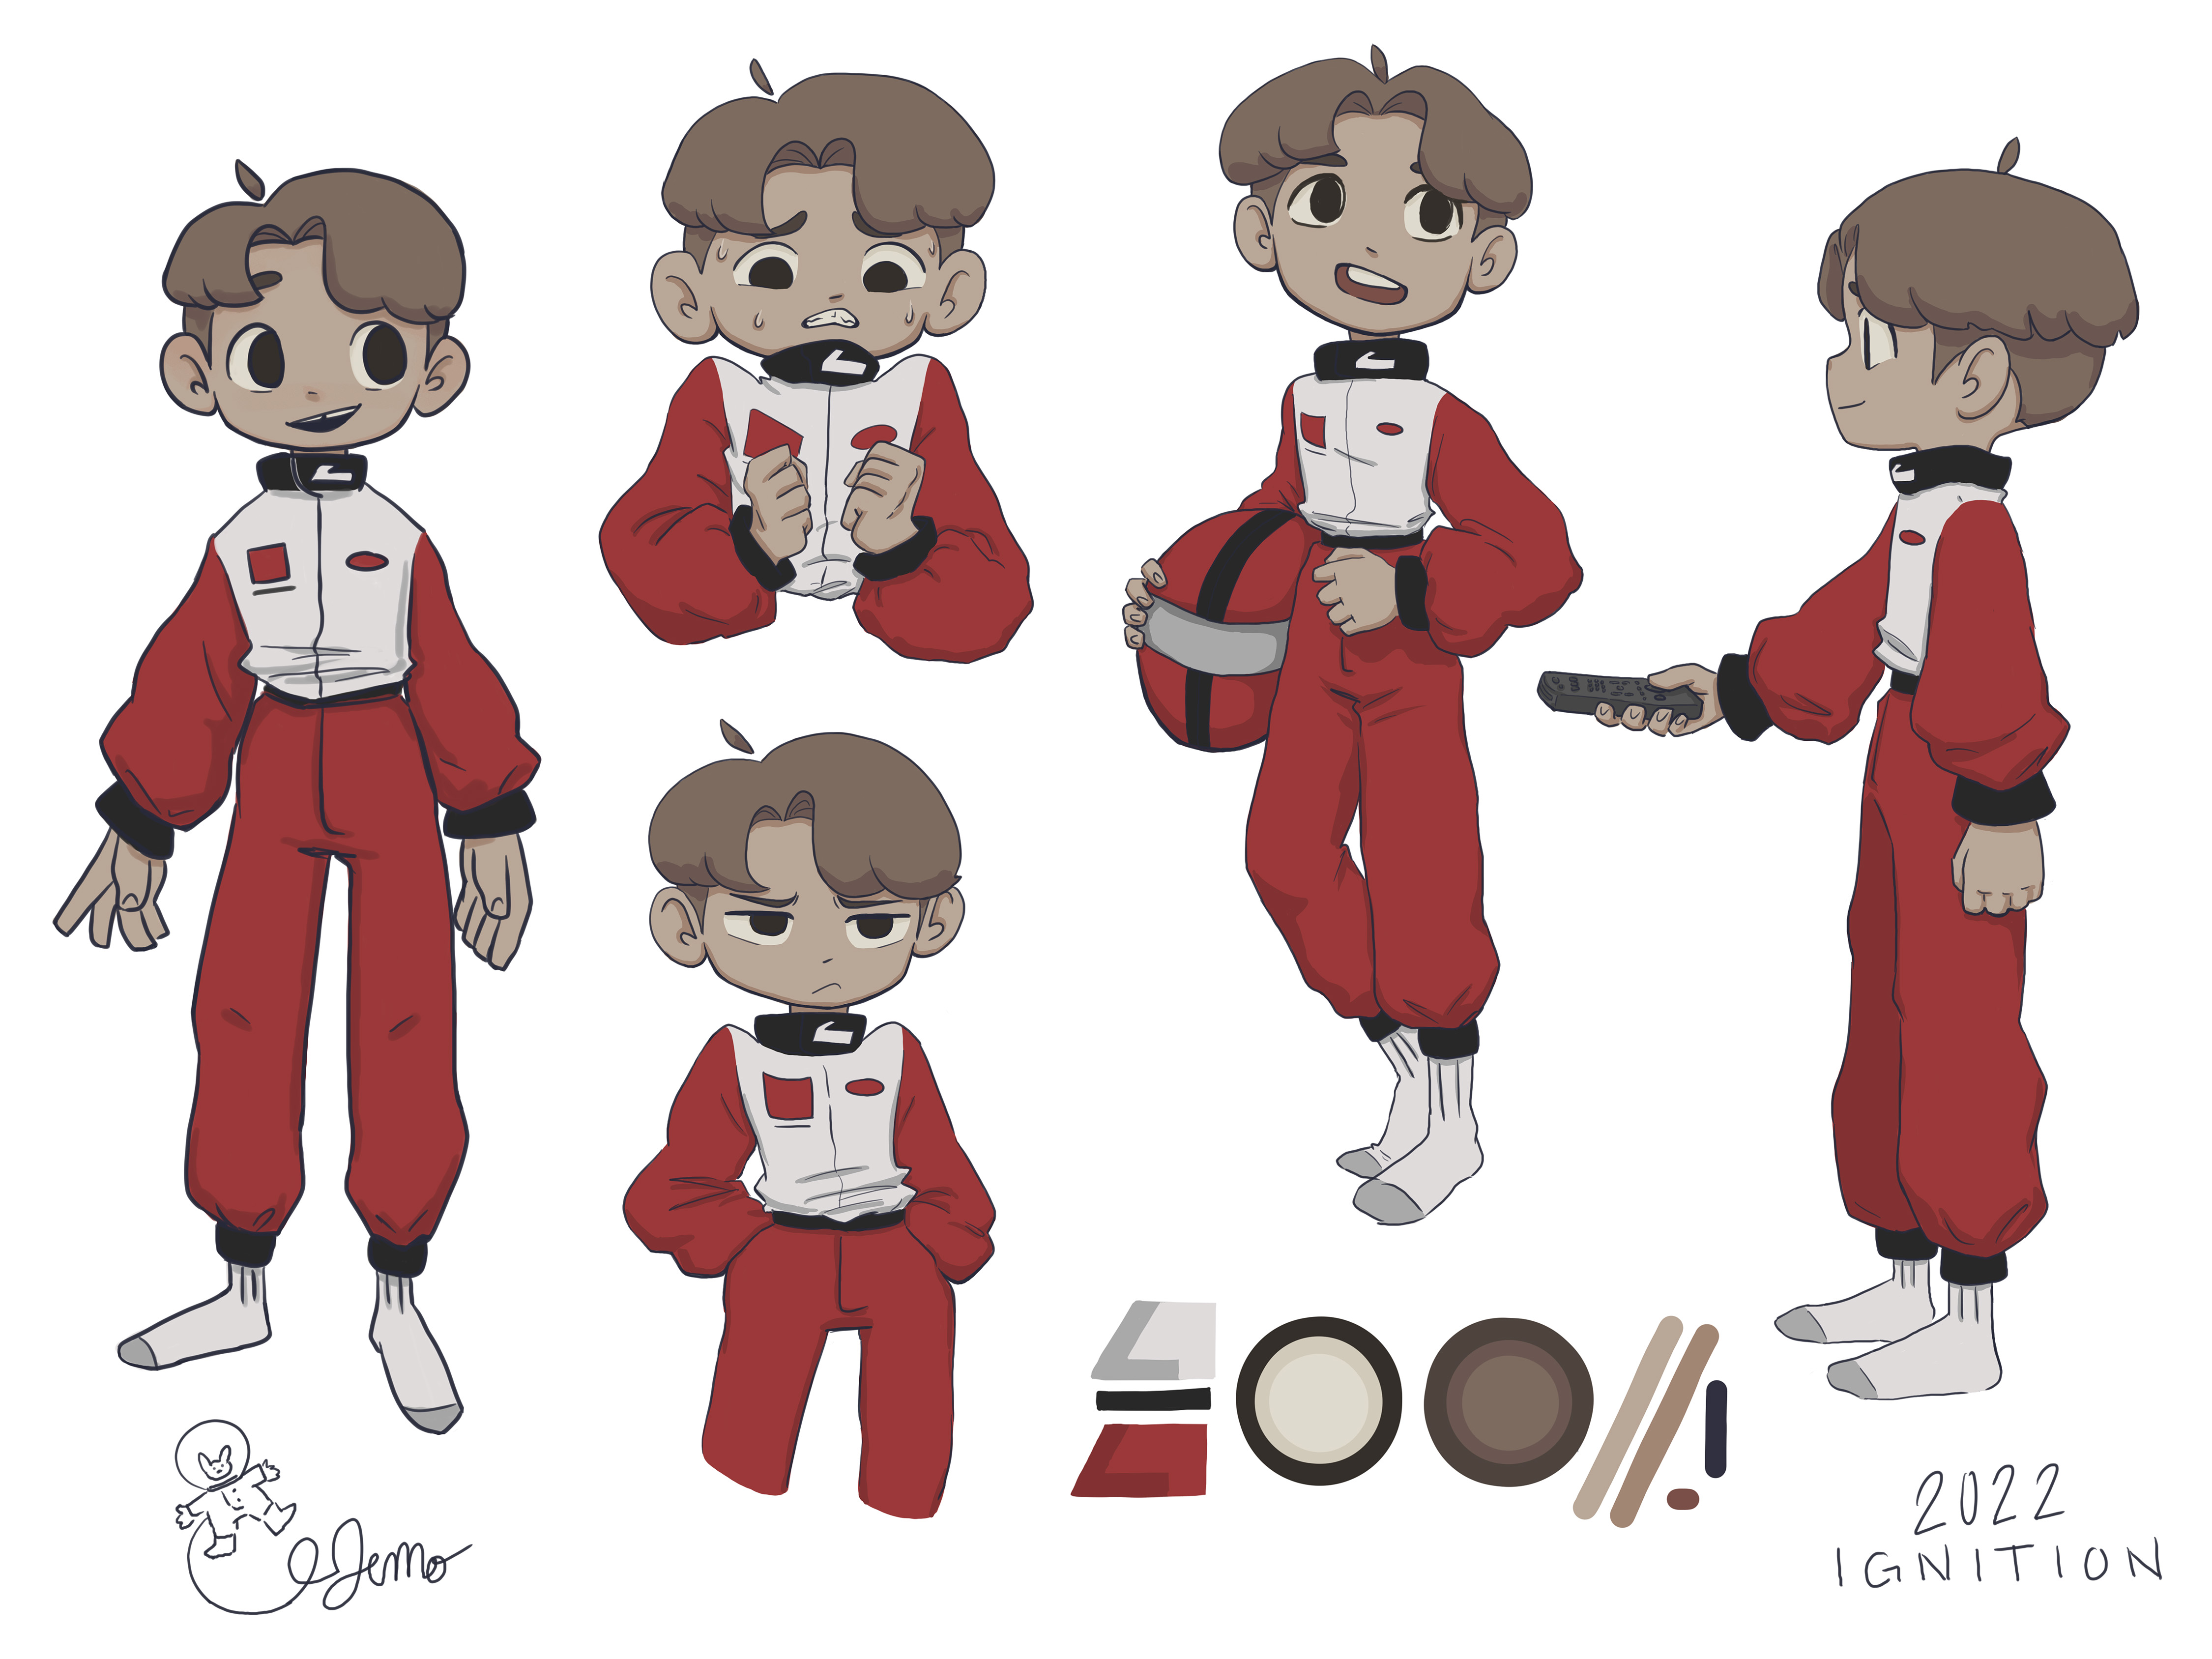  / Character Sheet for Enrique (Rico) from " Ignition", a short film. Created using Photoshop and Clip Studio Paint. 2022